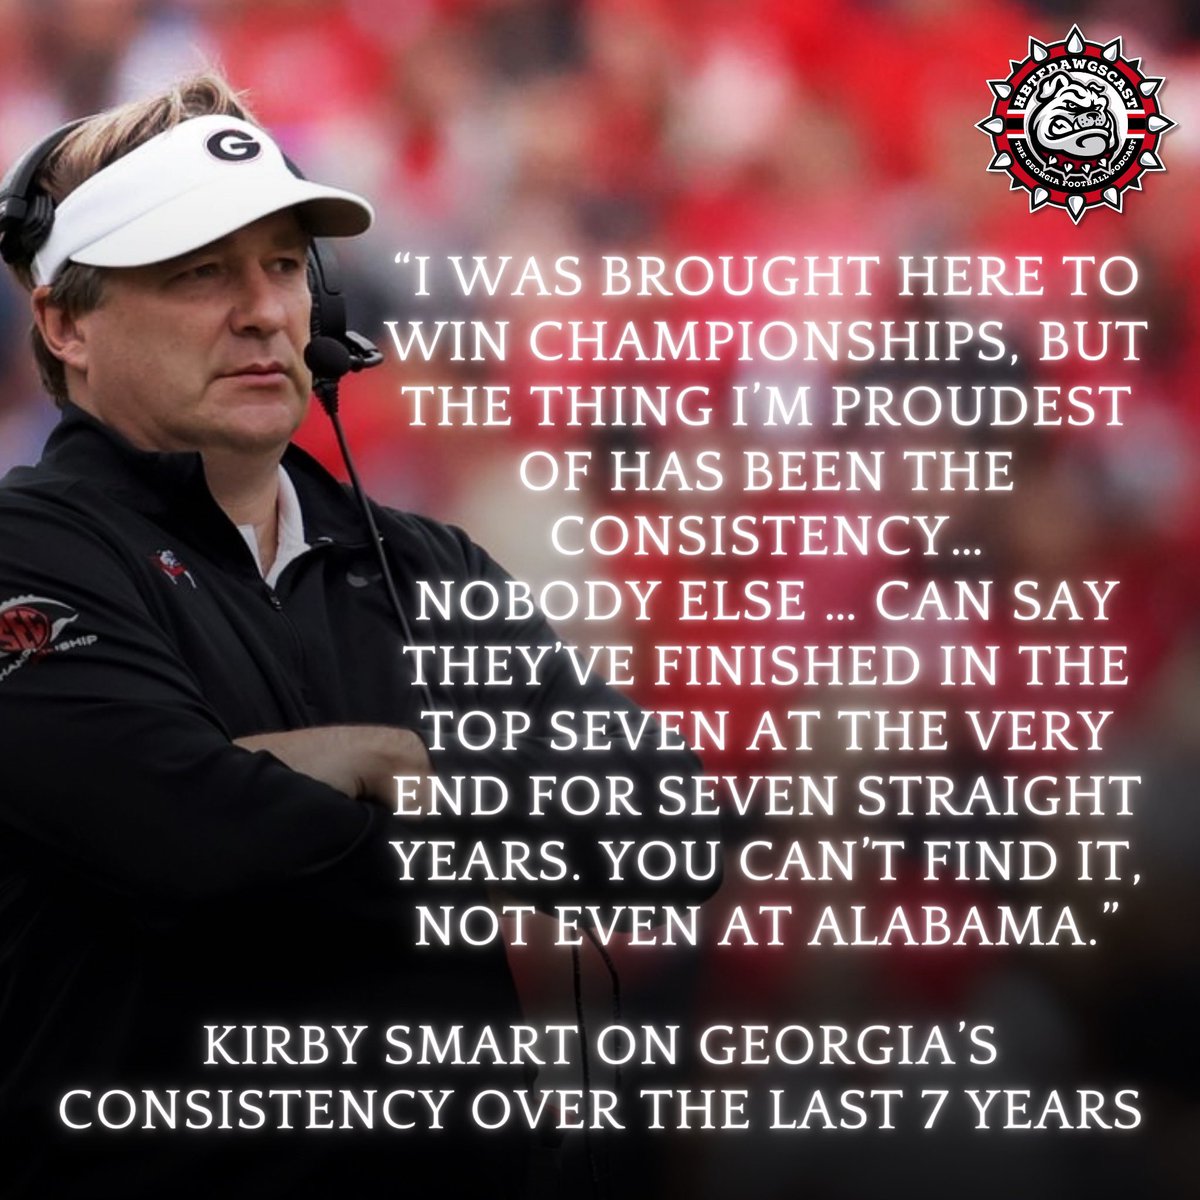 🔥“Not even at Alabama.”🔥 
Kirby Smart sat down with ESPN’s Chris Low and had this to say on Georgia’s consistency over the last 7 years ⤵️

Via Q/A with ESPN’s Chris Low

#kirbysmart #georgiafootball #georgiabulldogs #hbtfdawgscast #ThemDawgsIsHell #GoDawgs